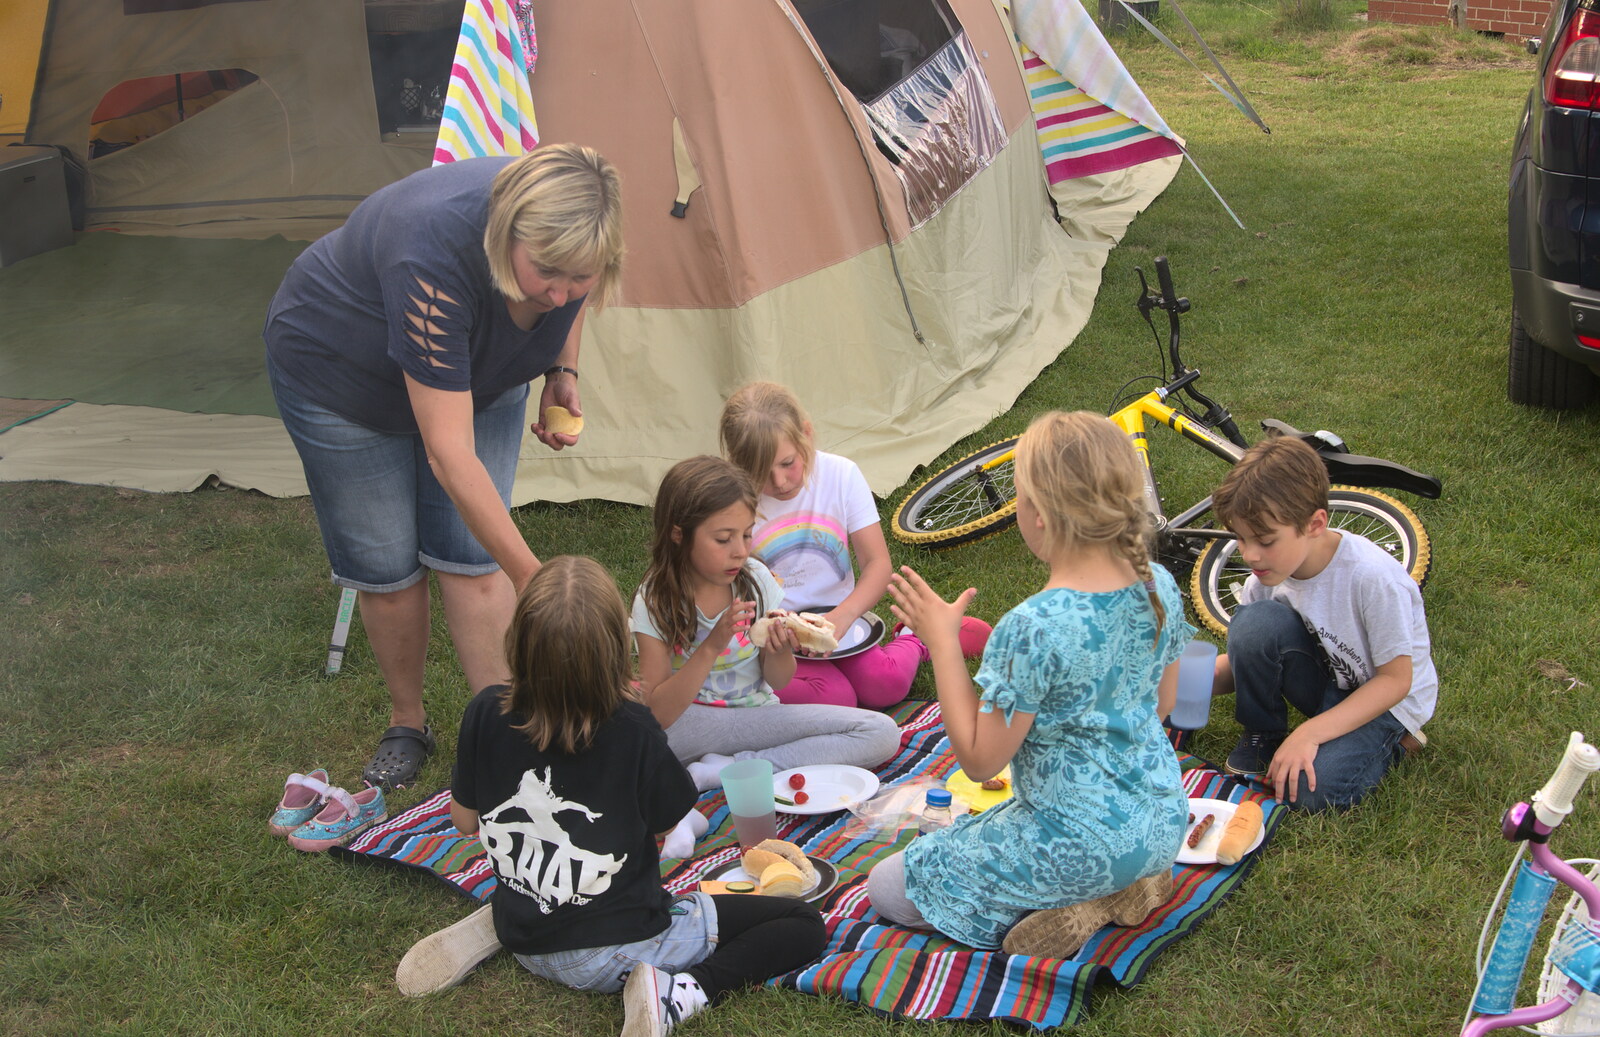 The children have their own blanket from Camping at Dower House, West Harling, Norfolk - 1st July 2017